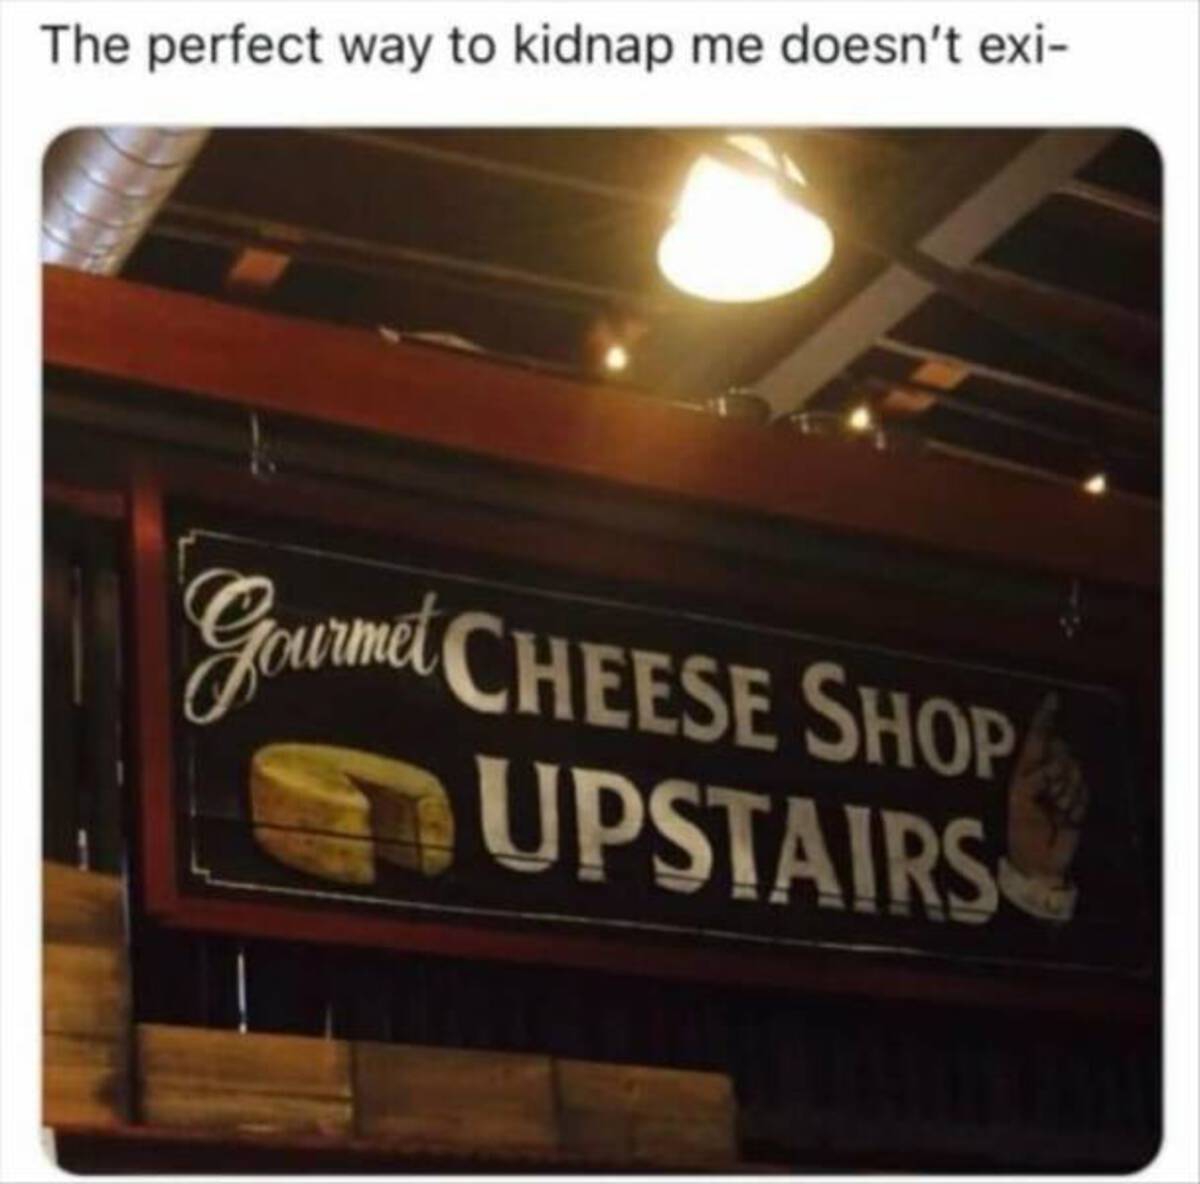 signage - The perfect way to kidnap me doesn't exi Gourmet Cheese Shop Upstairs